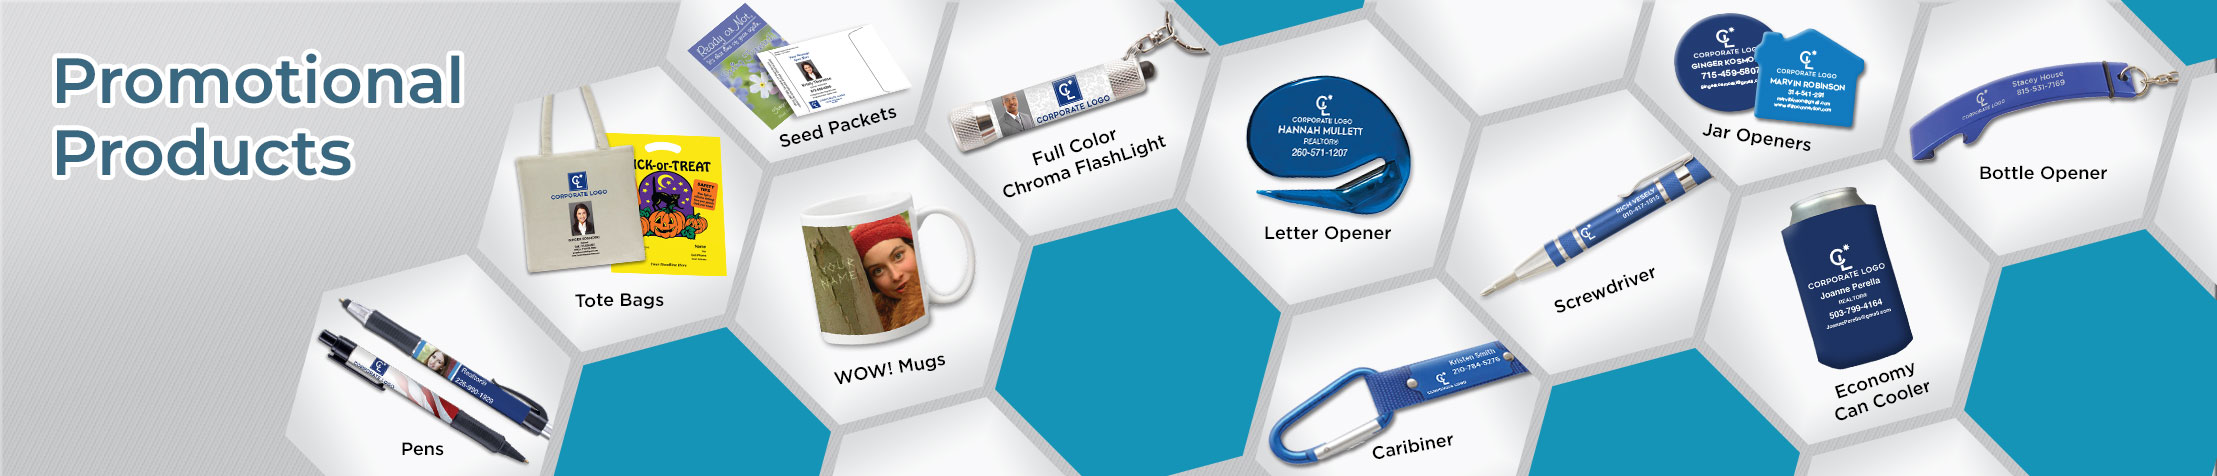 Coldwell Banker Real Estate Promotional Products - Coldwell Banker  personalized promotional pens, key chains, tote bags, flashlights, mugs | BestPrintBuy.com